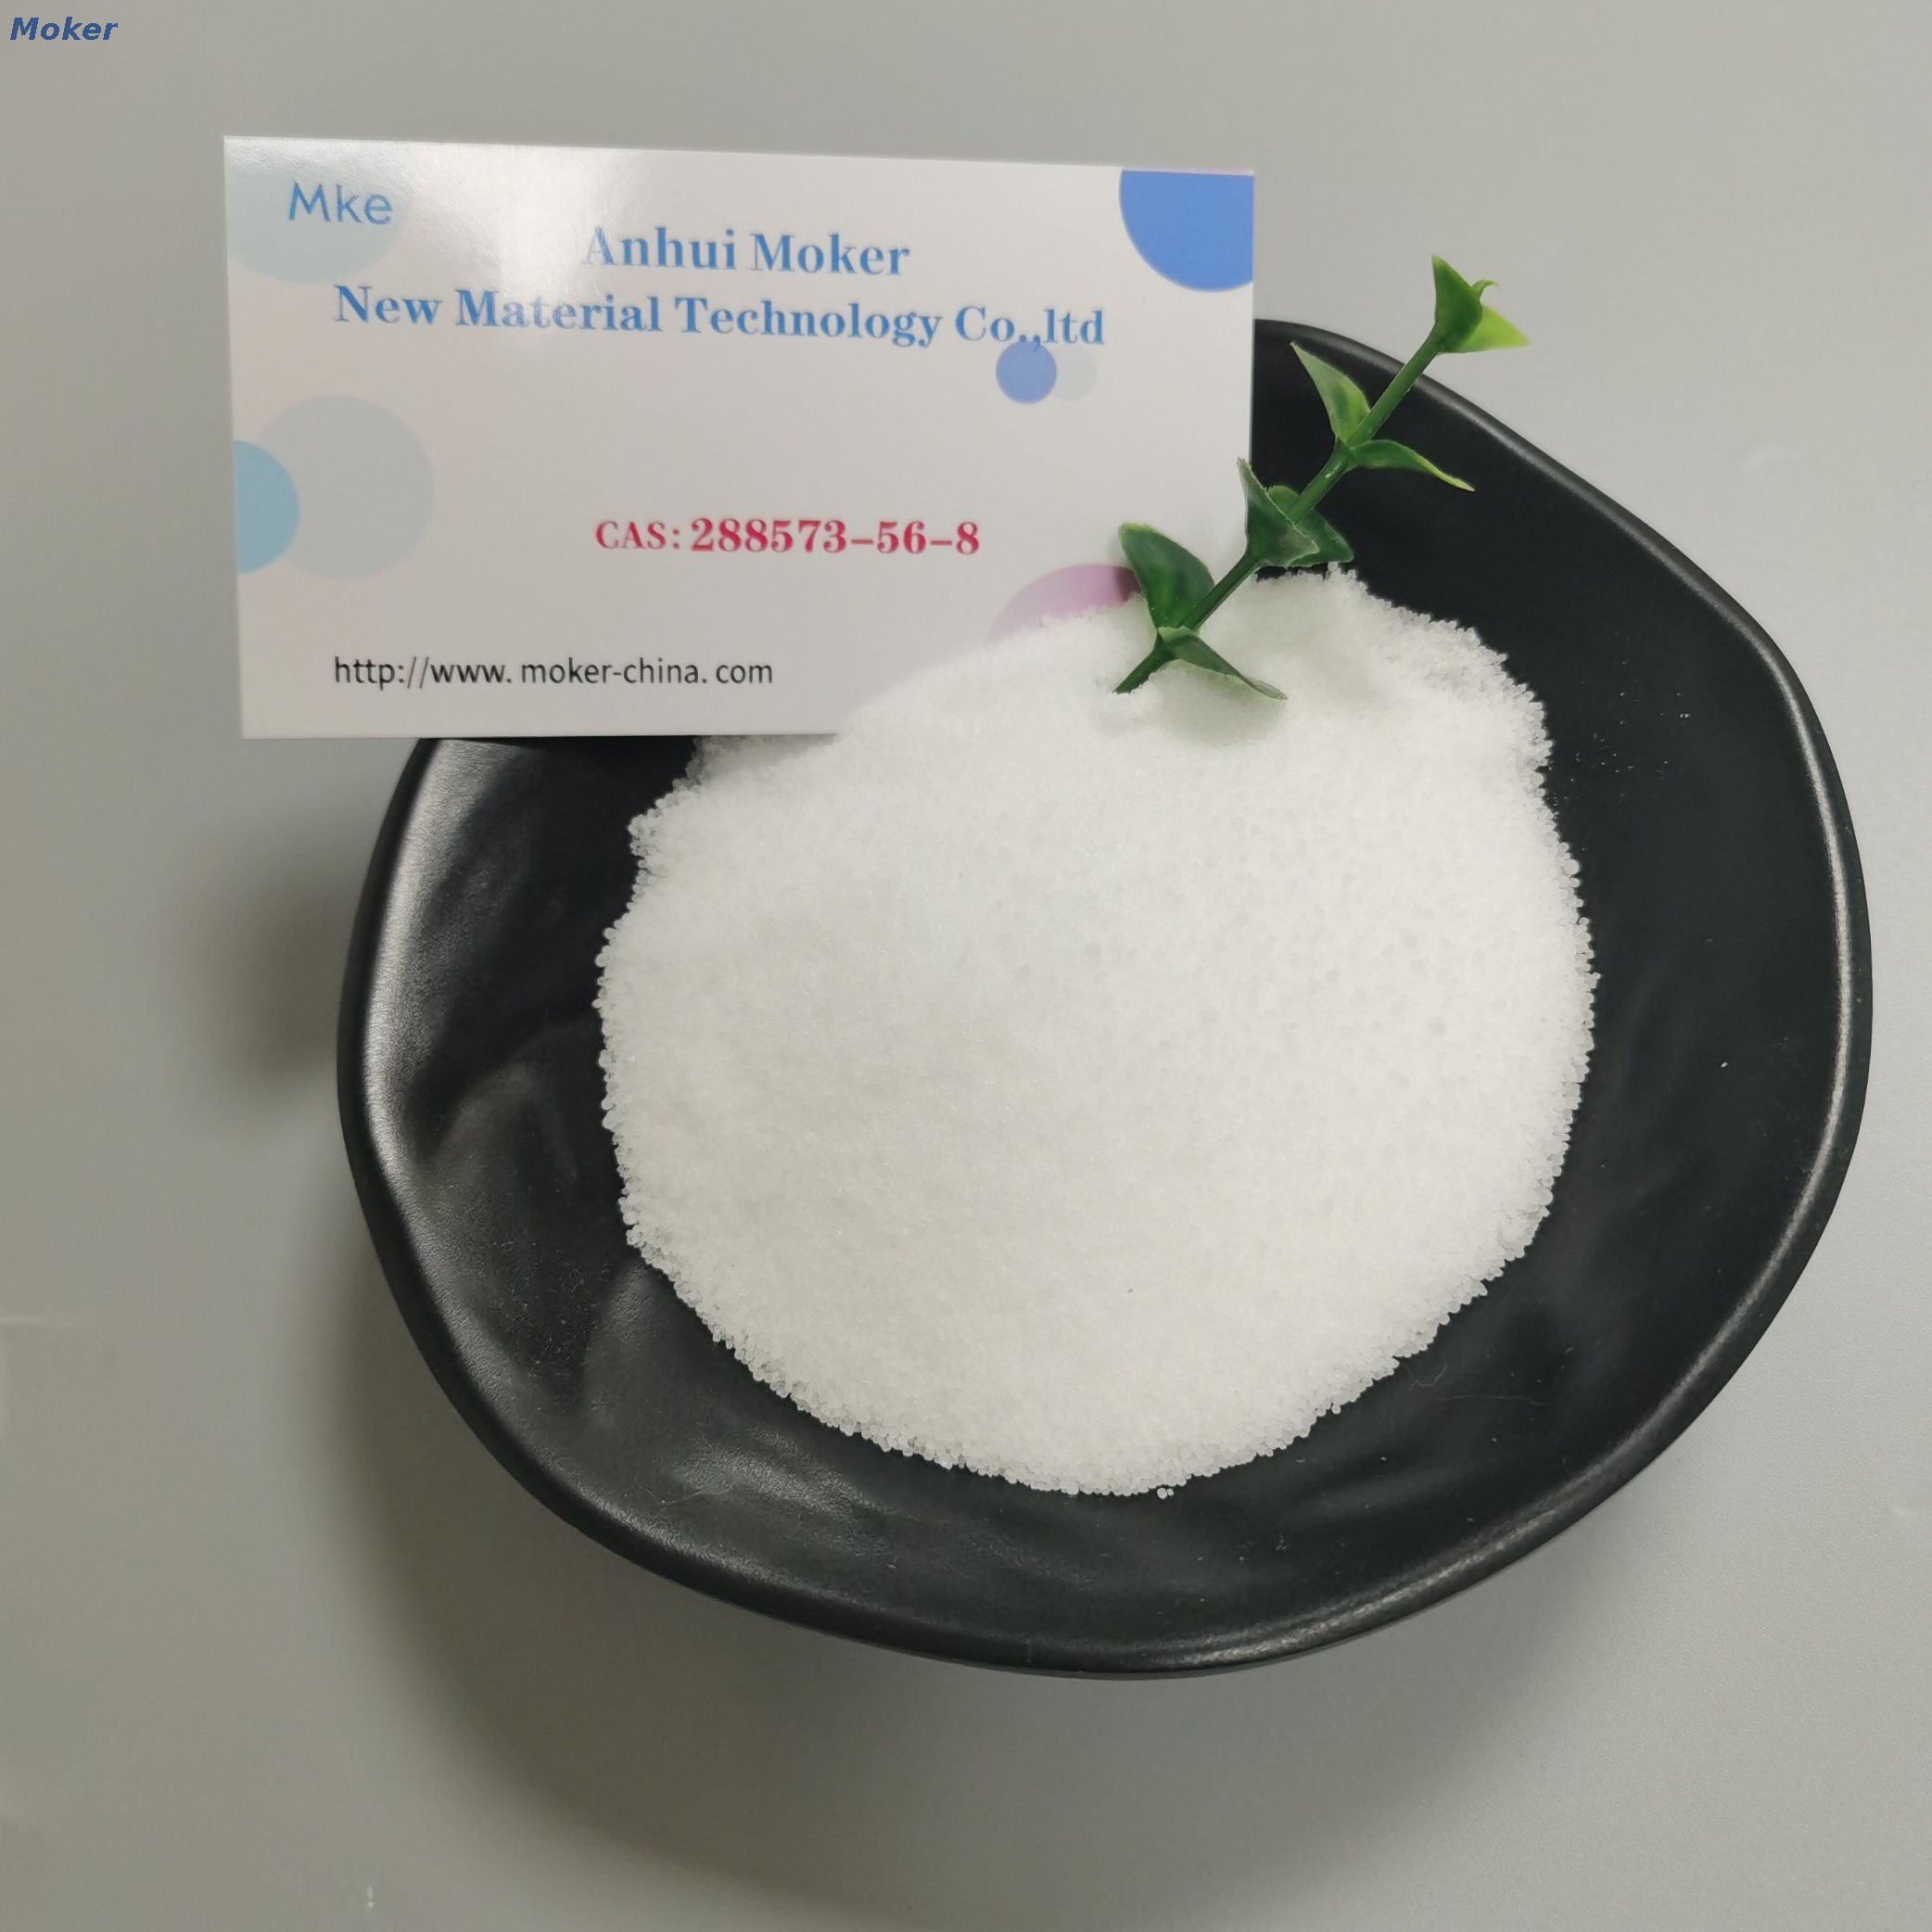 Top Quality Tert-Butyl 4- (4-fluoroanilino) Piperidine-1-Carboxylate CAS288573-56-8 with Factory Price